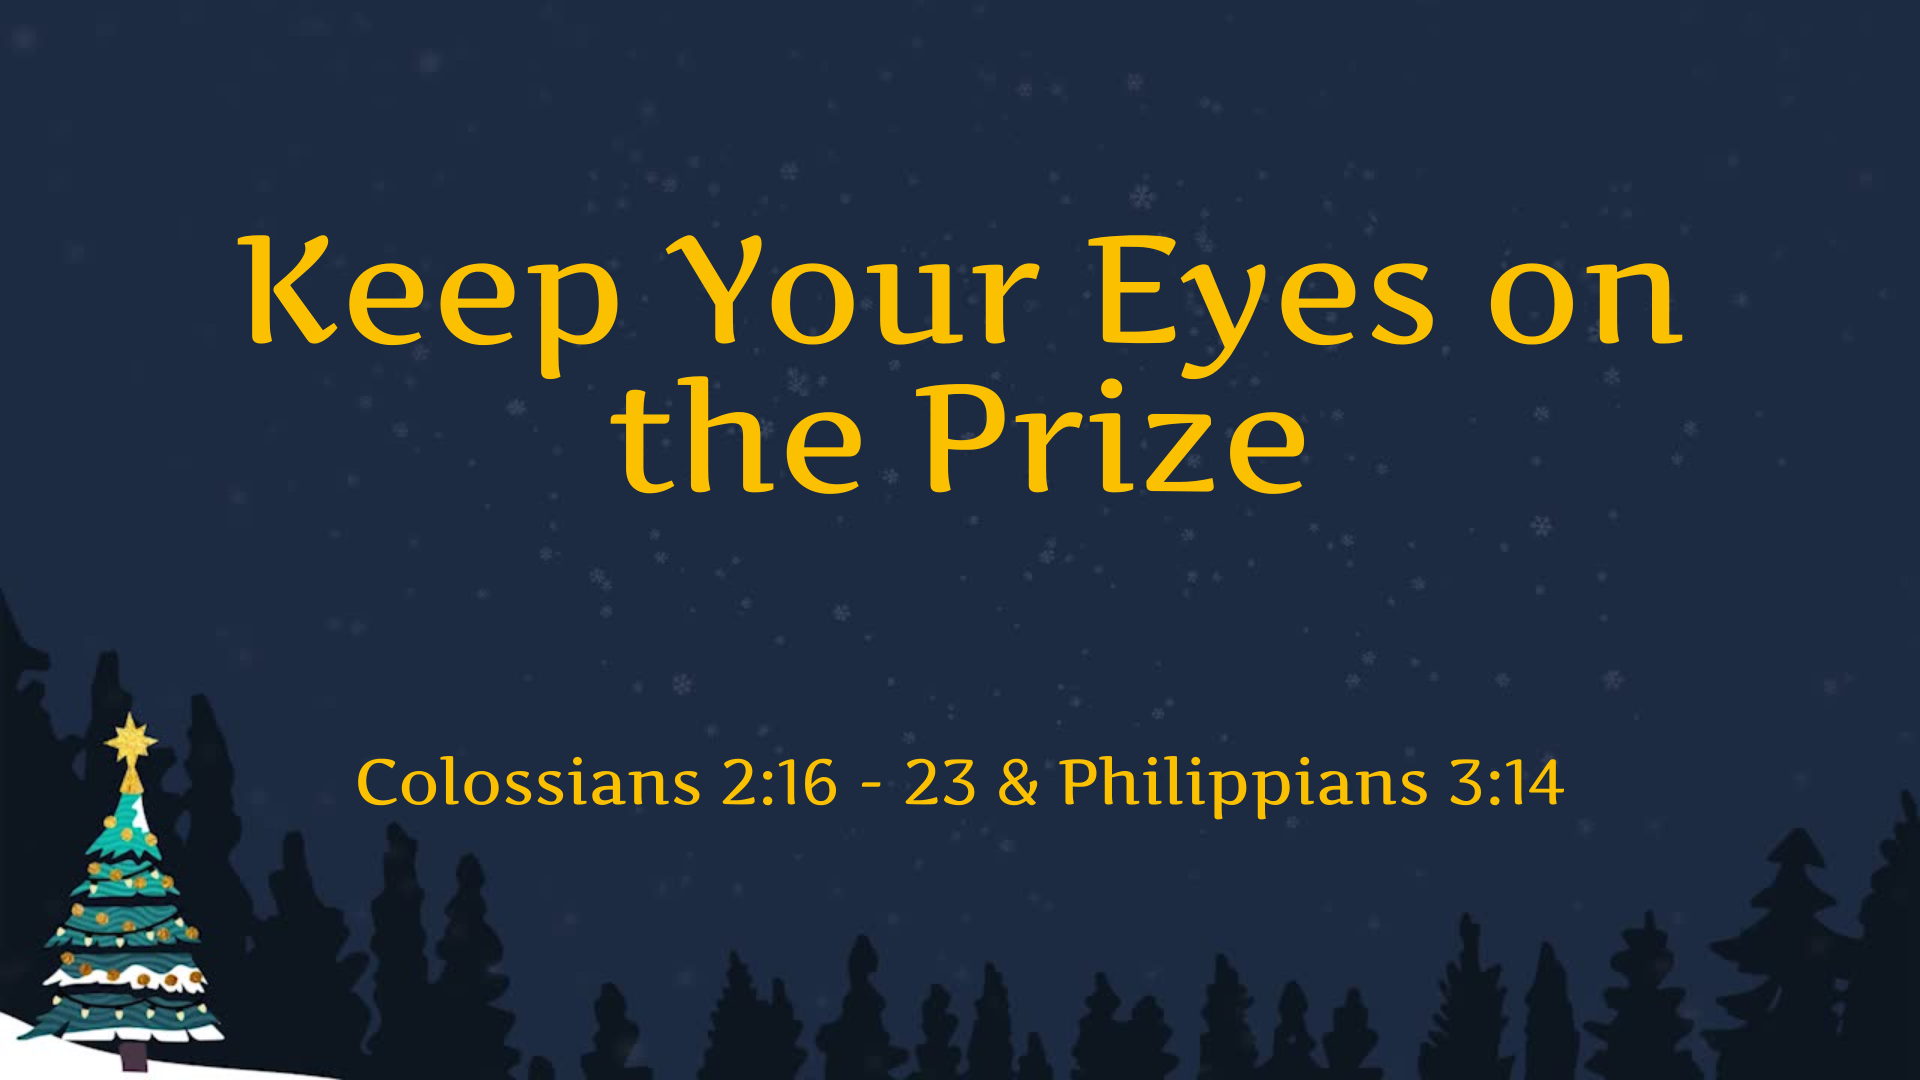 Dec 4, 2022 - Keep Your Eyes on the Prize  (Video) - Colossians 2:16 - 23 & Philippians 3:14